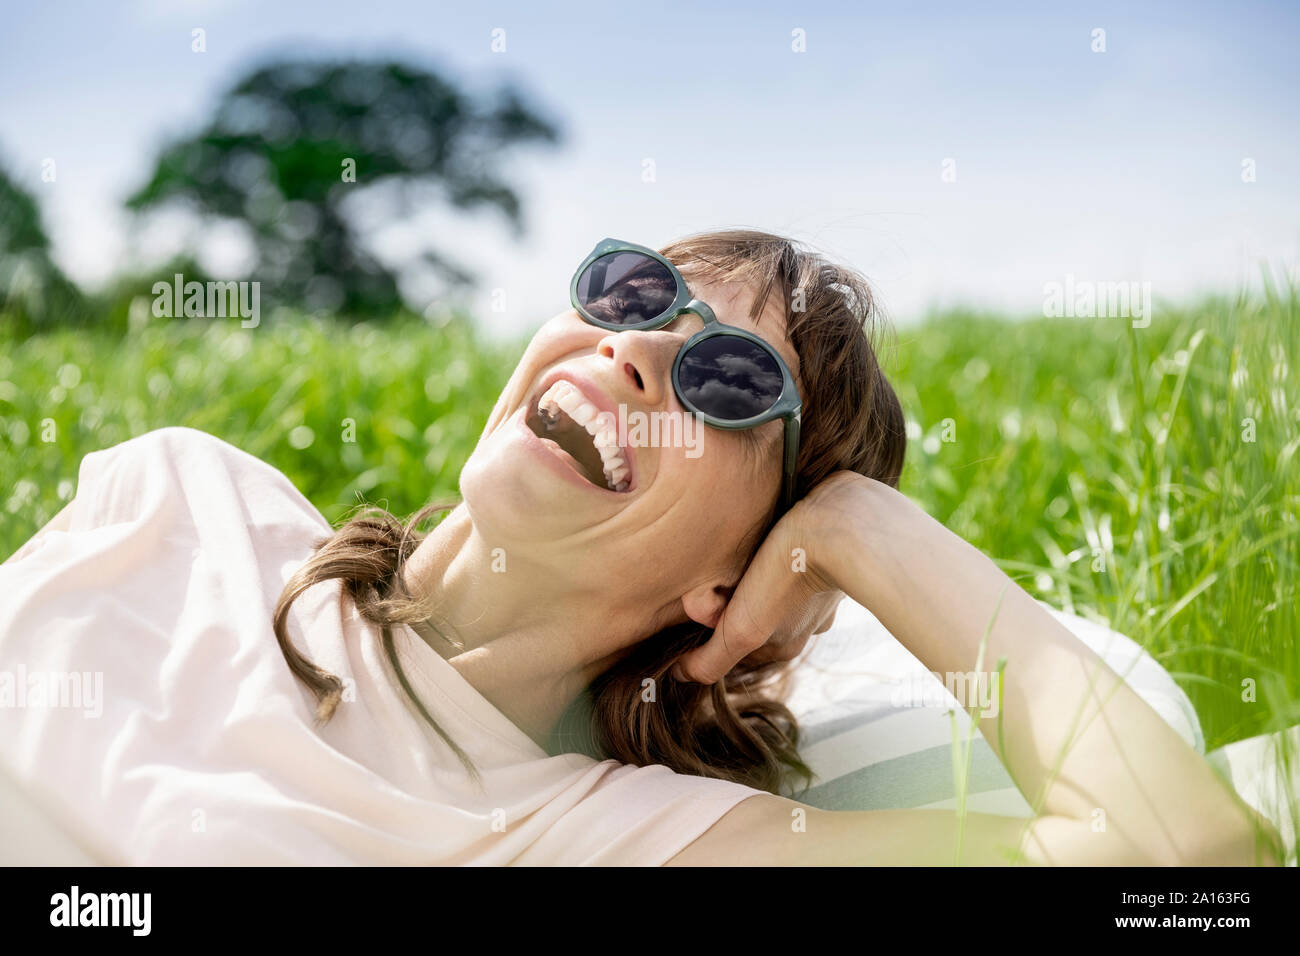 Portrait of laughing relaxed woman lying on a meadow Stock Photo